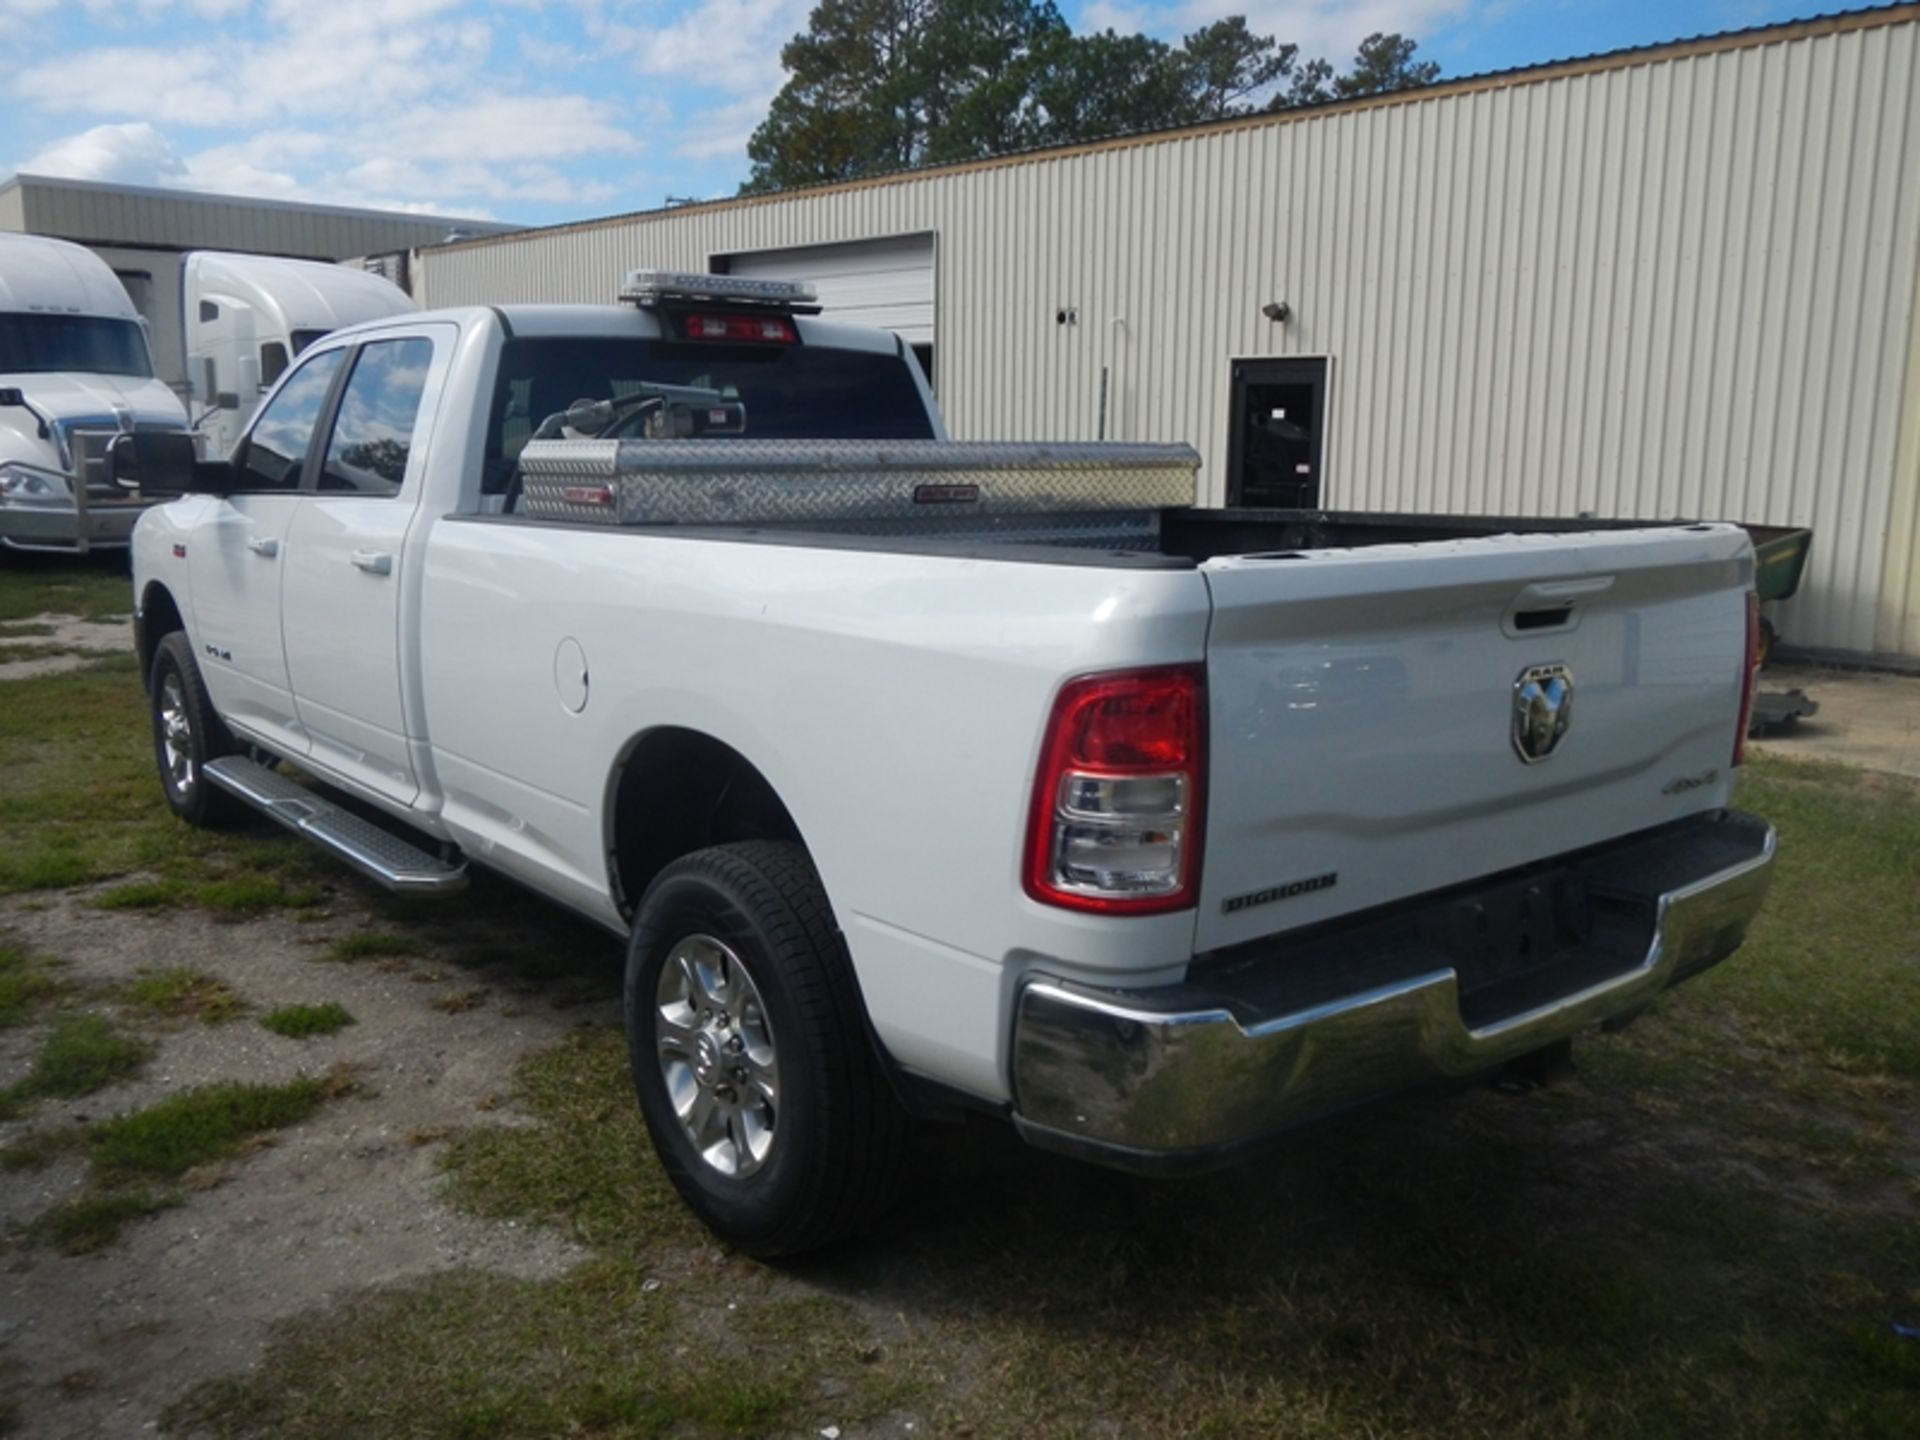 2021 RAM 2500 6.4L Hemi gas, crew cab, long bed, 4wd, Big Horn trim package dent in side of bed - - Bild 5 aus 8